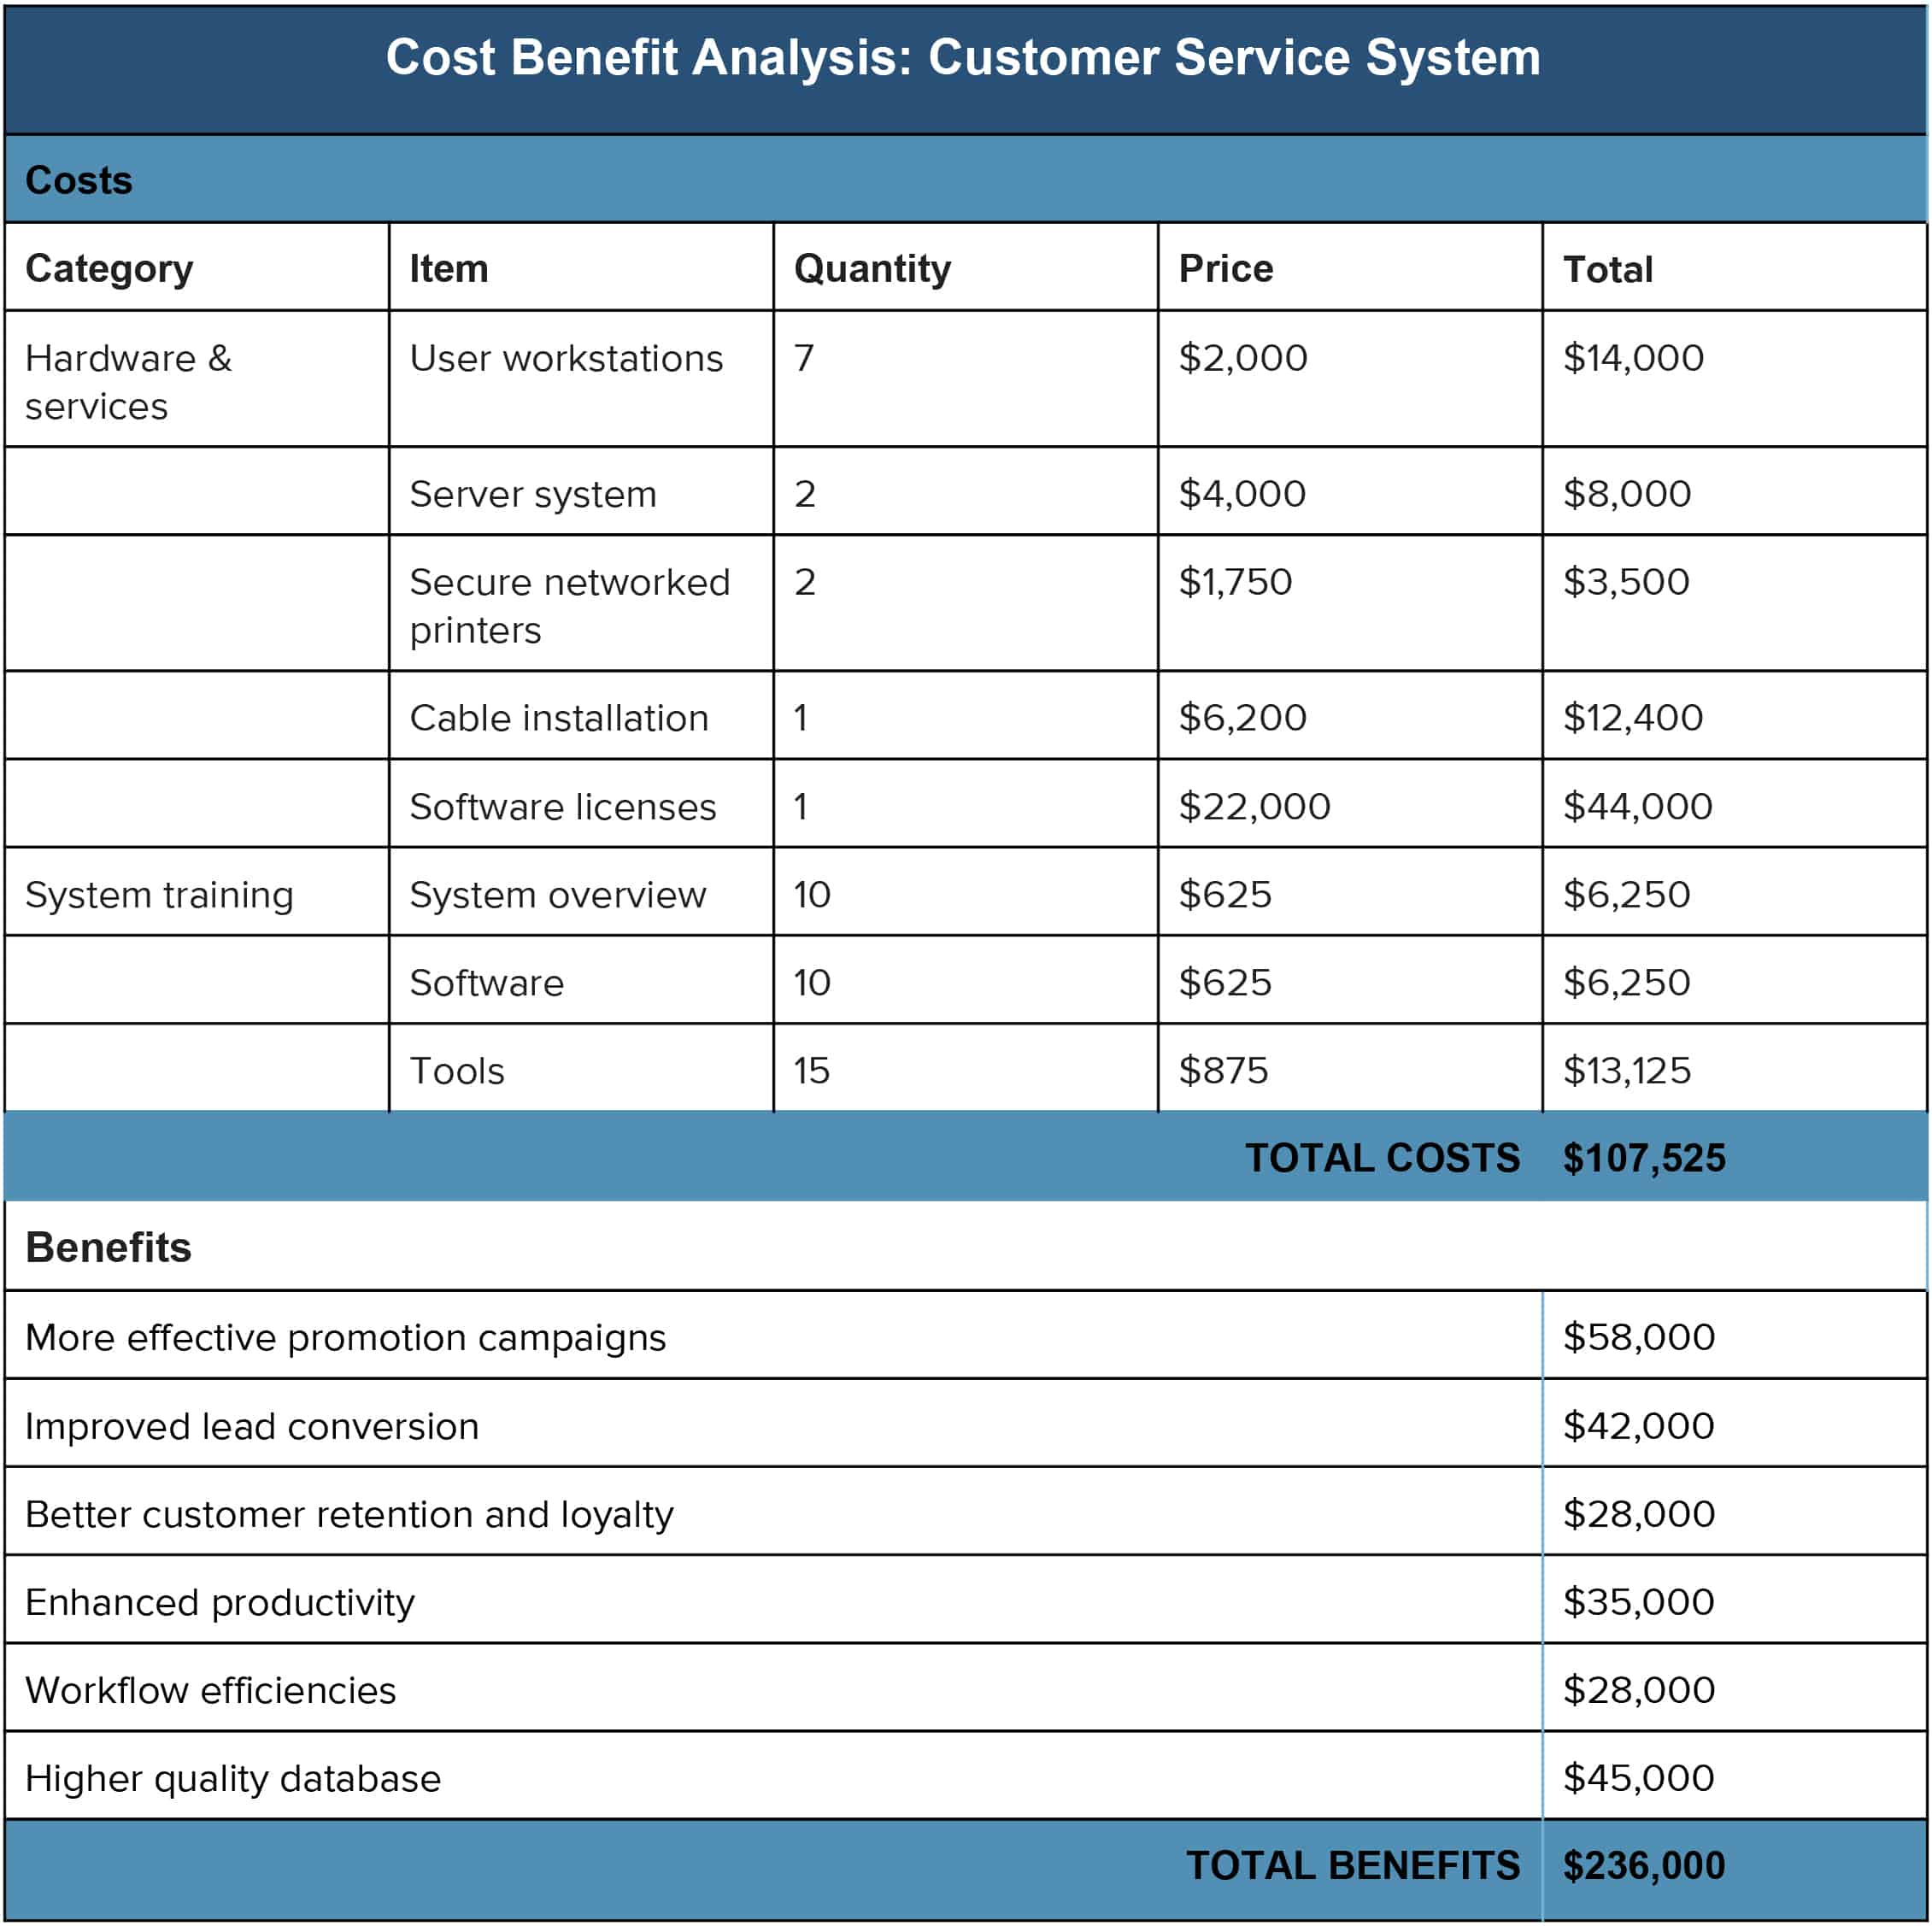 Arriba roble Chispa  chispear Cost Benefit Analysis: An Expert Guide | Smartsheet